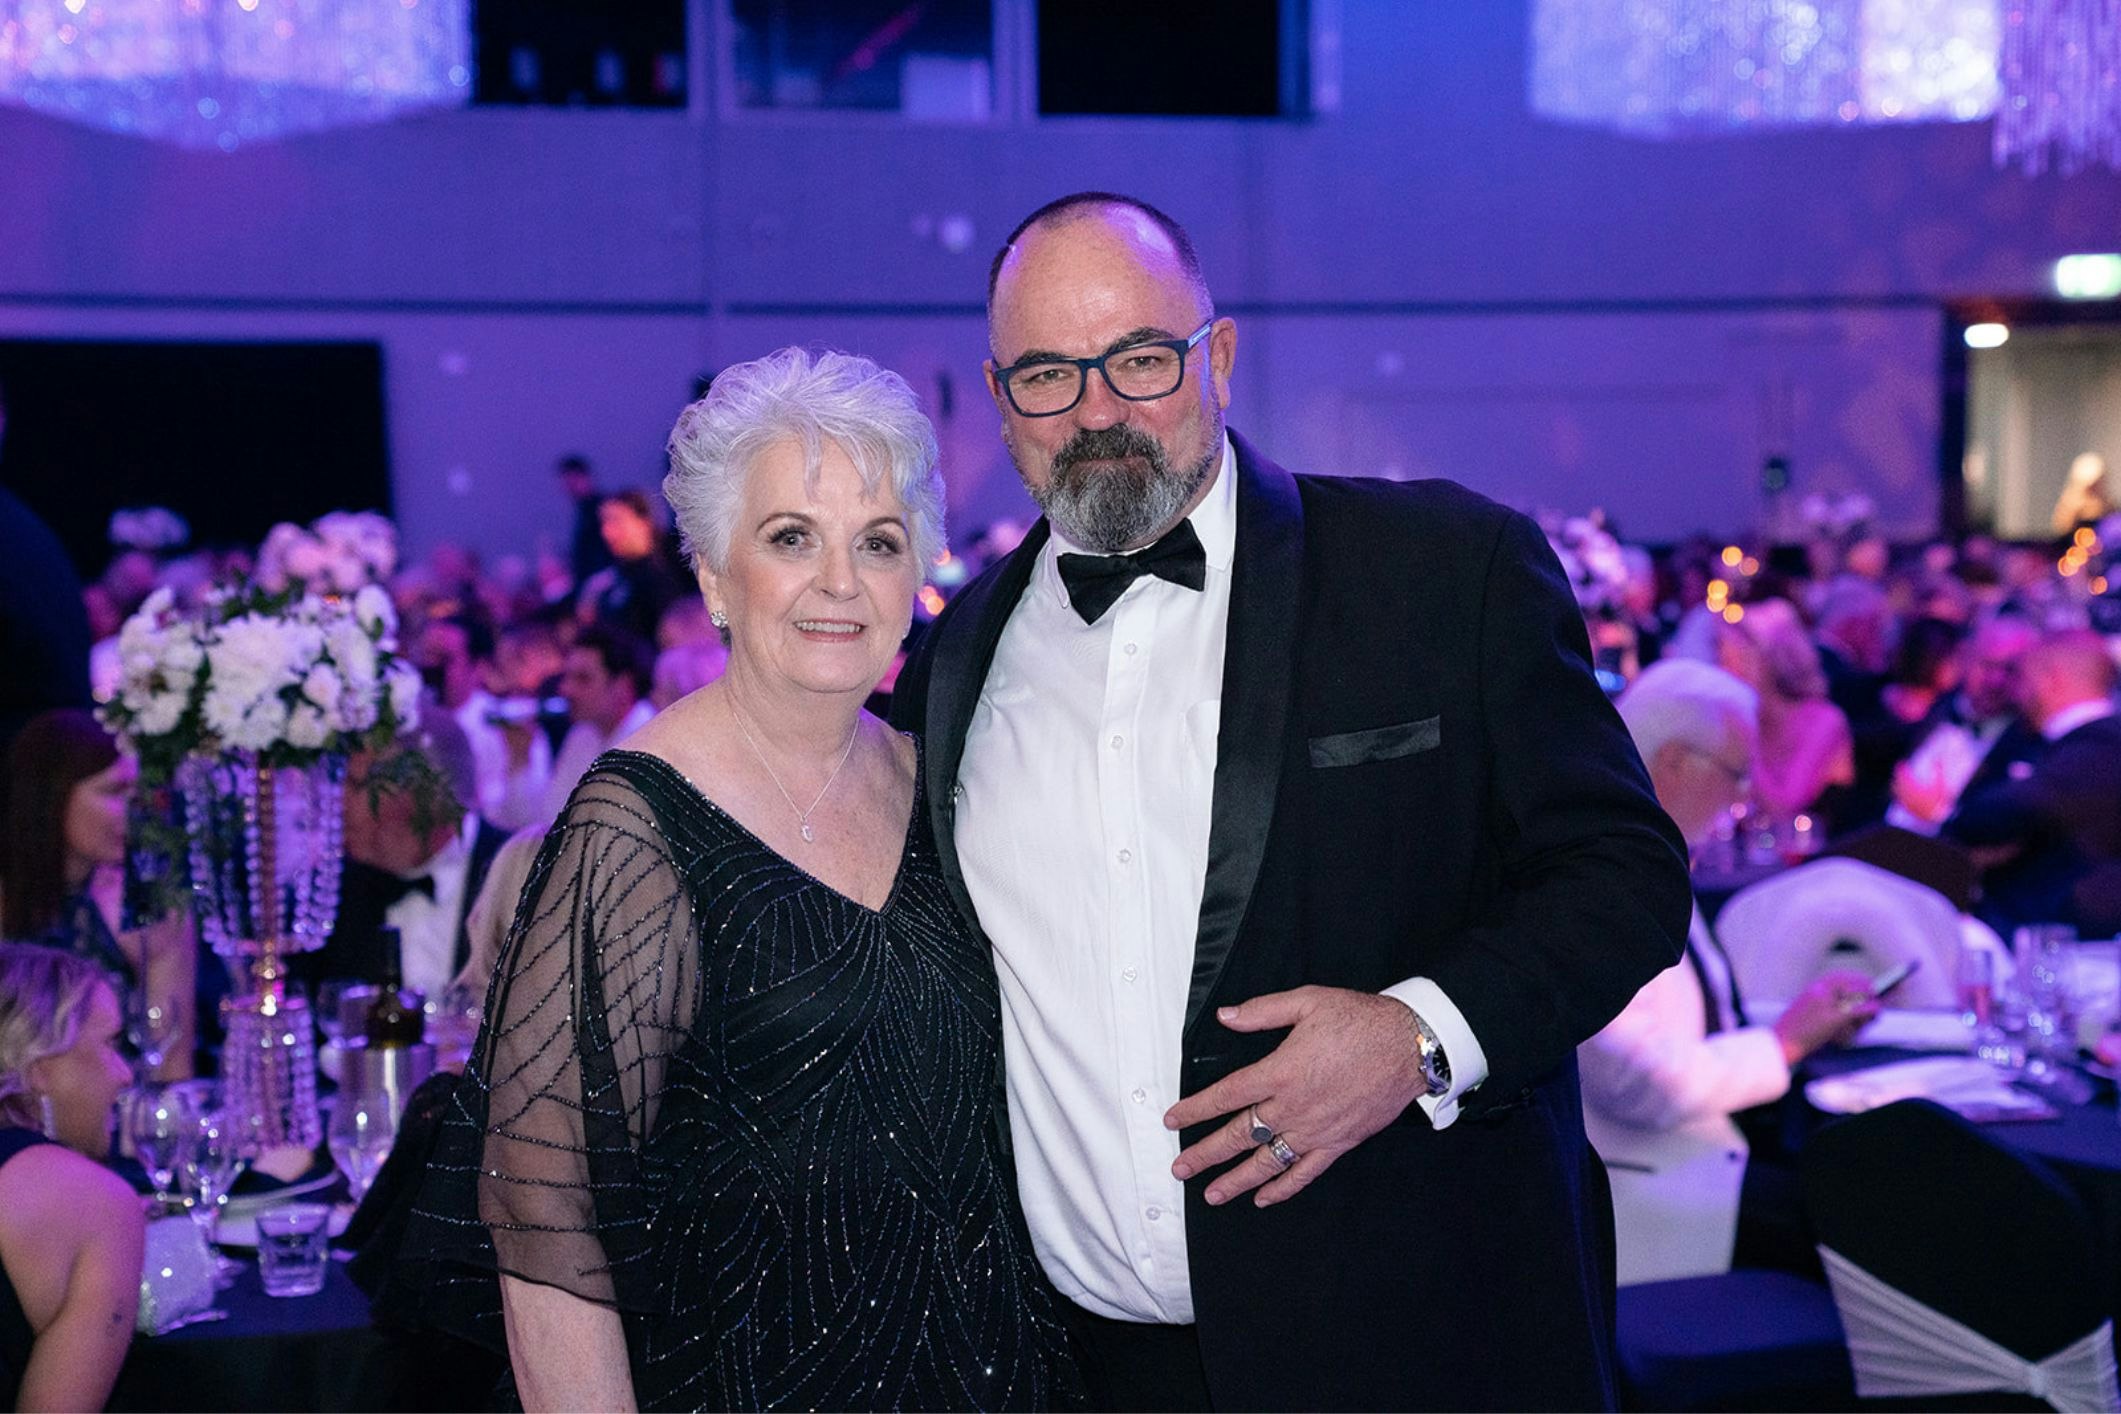 Prima Commercial Fitouts Director Brendan Wavell-Smith with STEPS Managing Director Carmel Crouch at the 2023 STEPS Grand Winter Ball at Caloundra, Sunshine Coast. [Source: Prima Commercial Fitouts]
